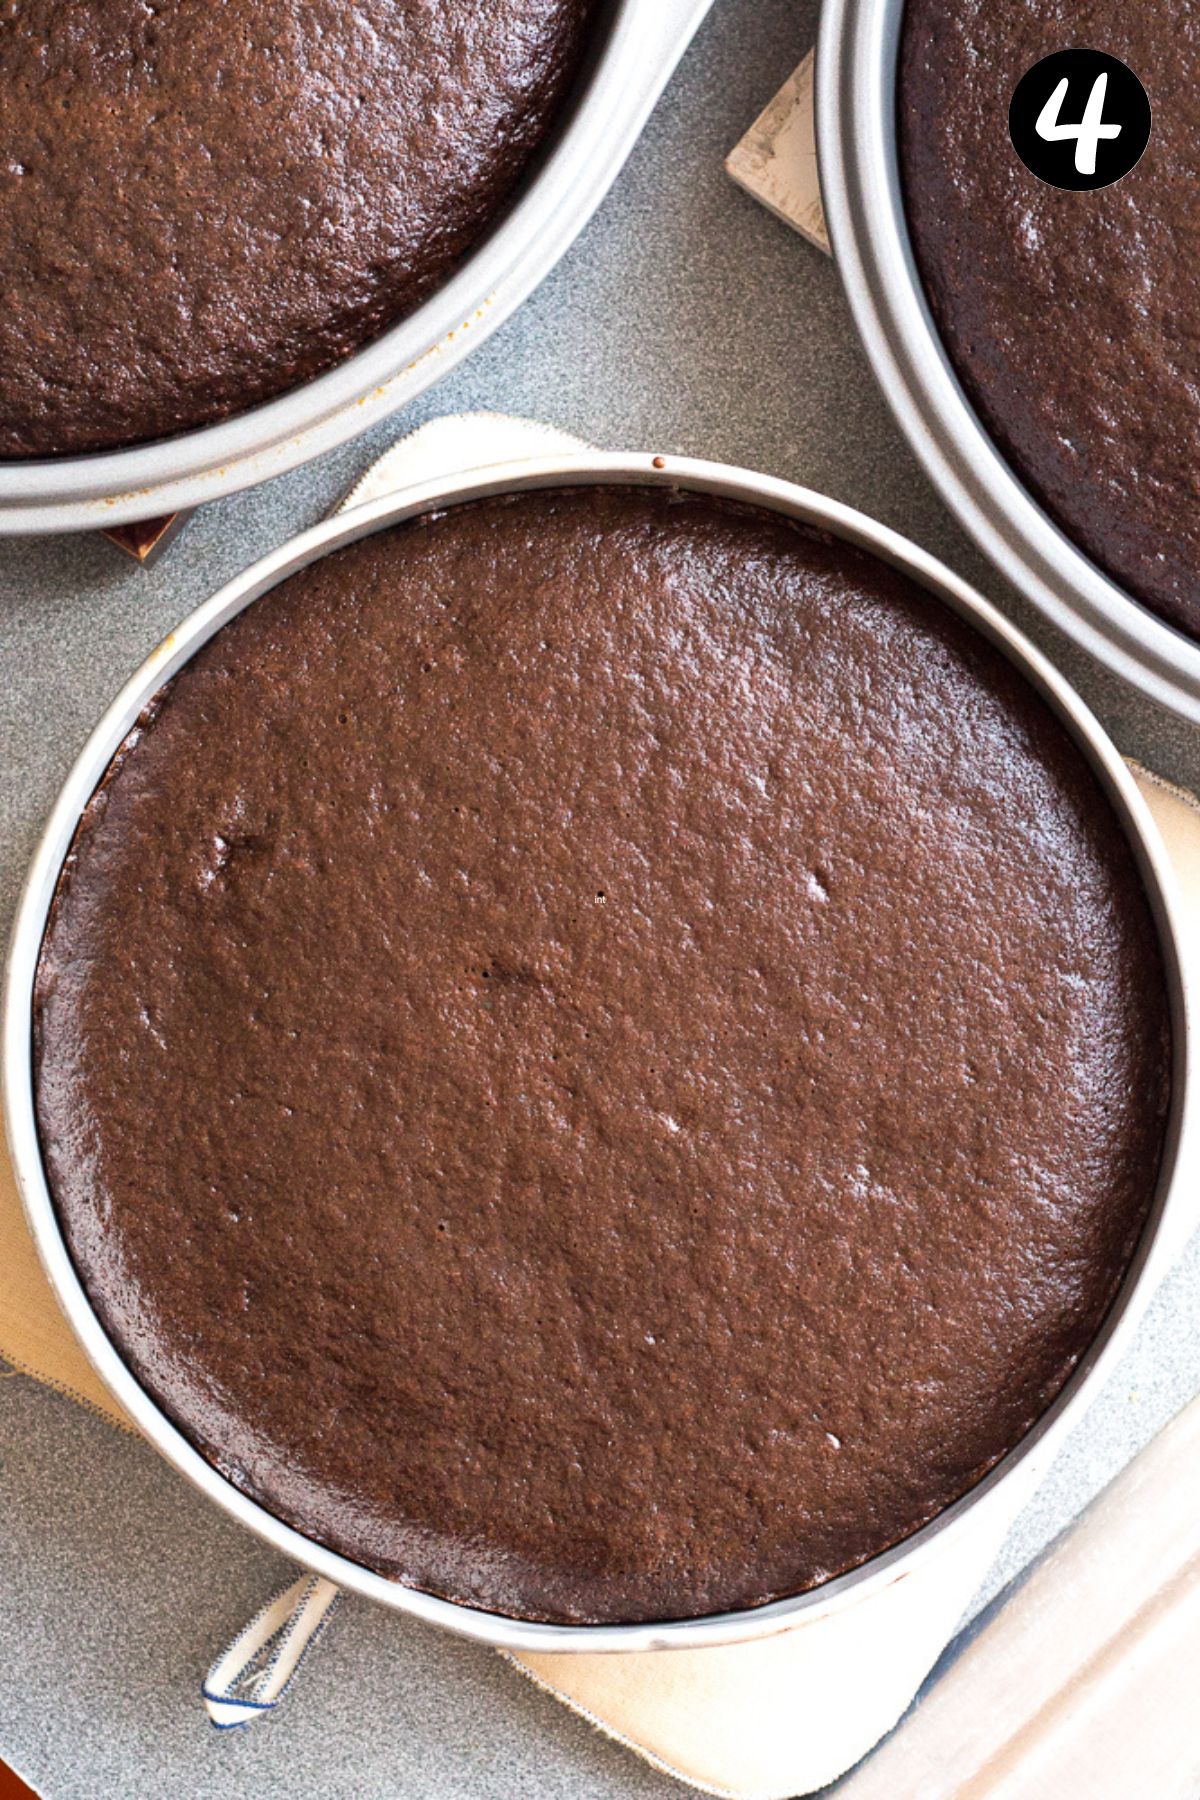 finished chocolate cakes in cake tins.